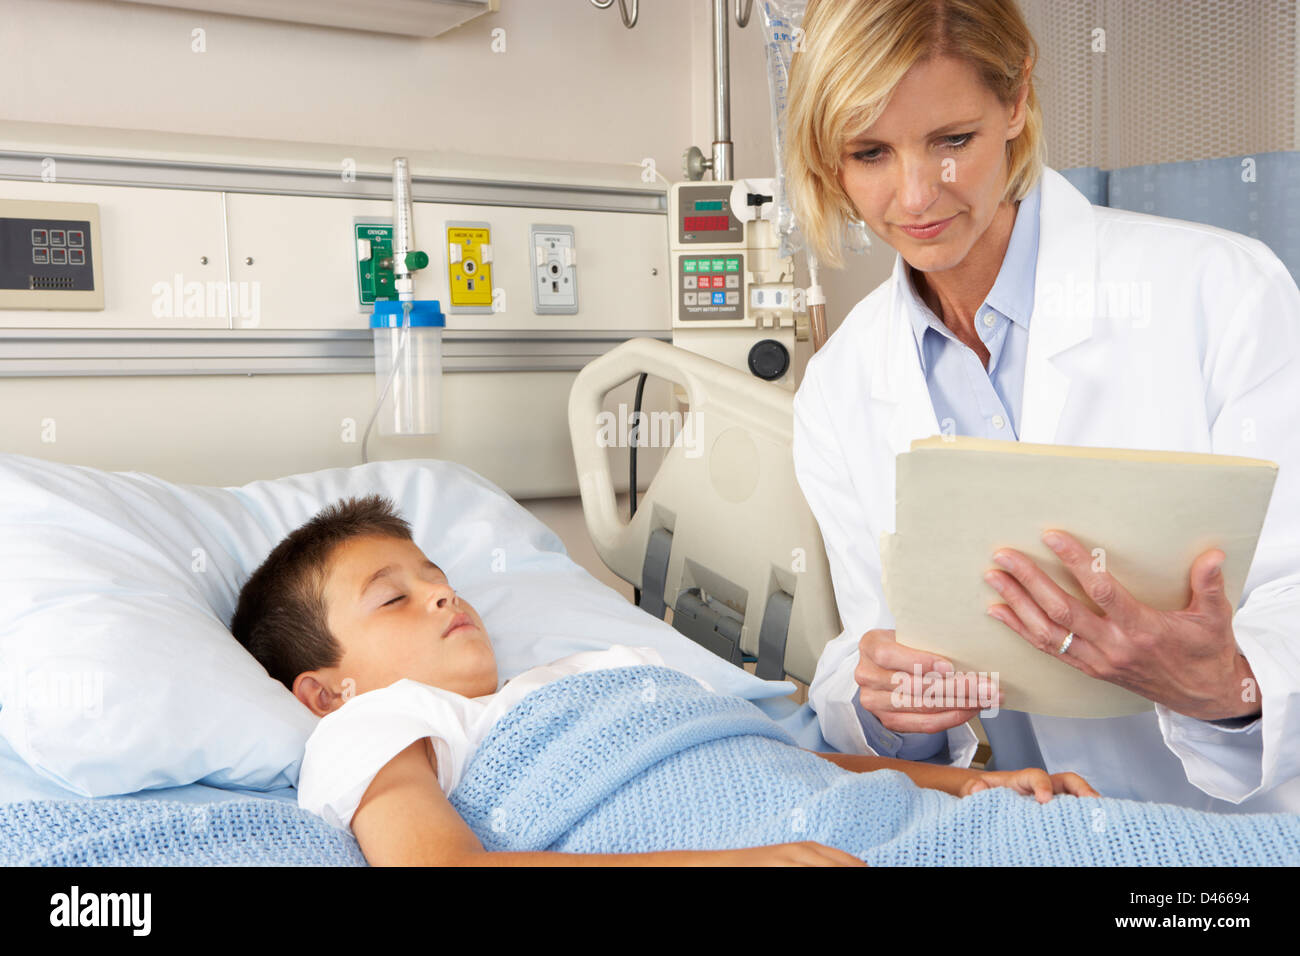 Doctor Examining Child Patient On Ward Stock Photo - Alamy